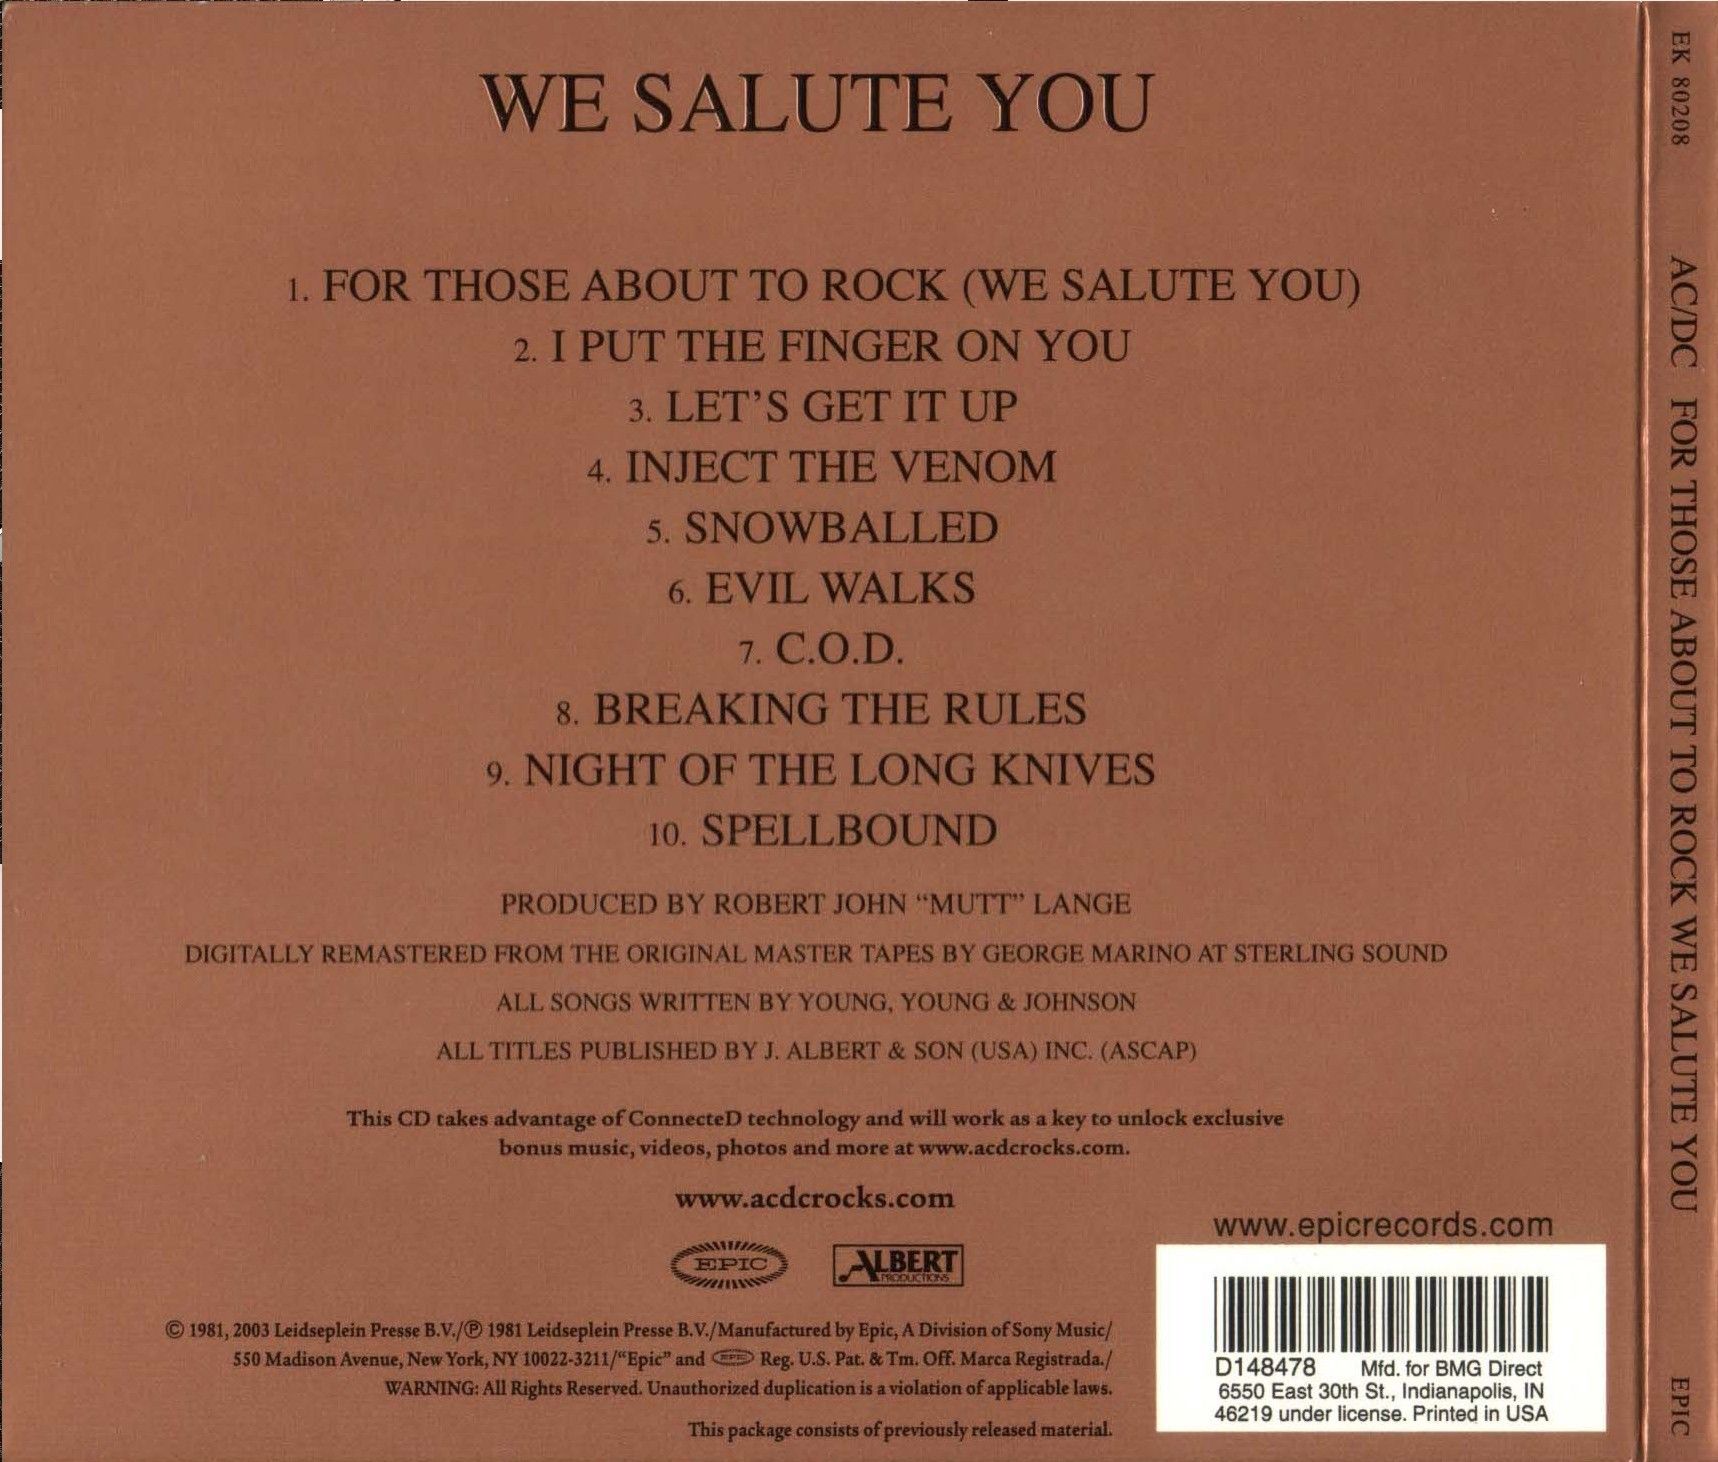 [AllCDCovers] acdc for those about to rock we salute you 2003 retail cd back